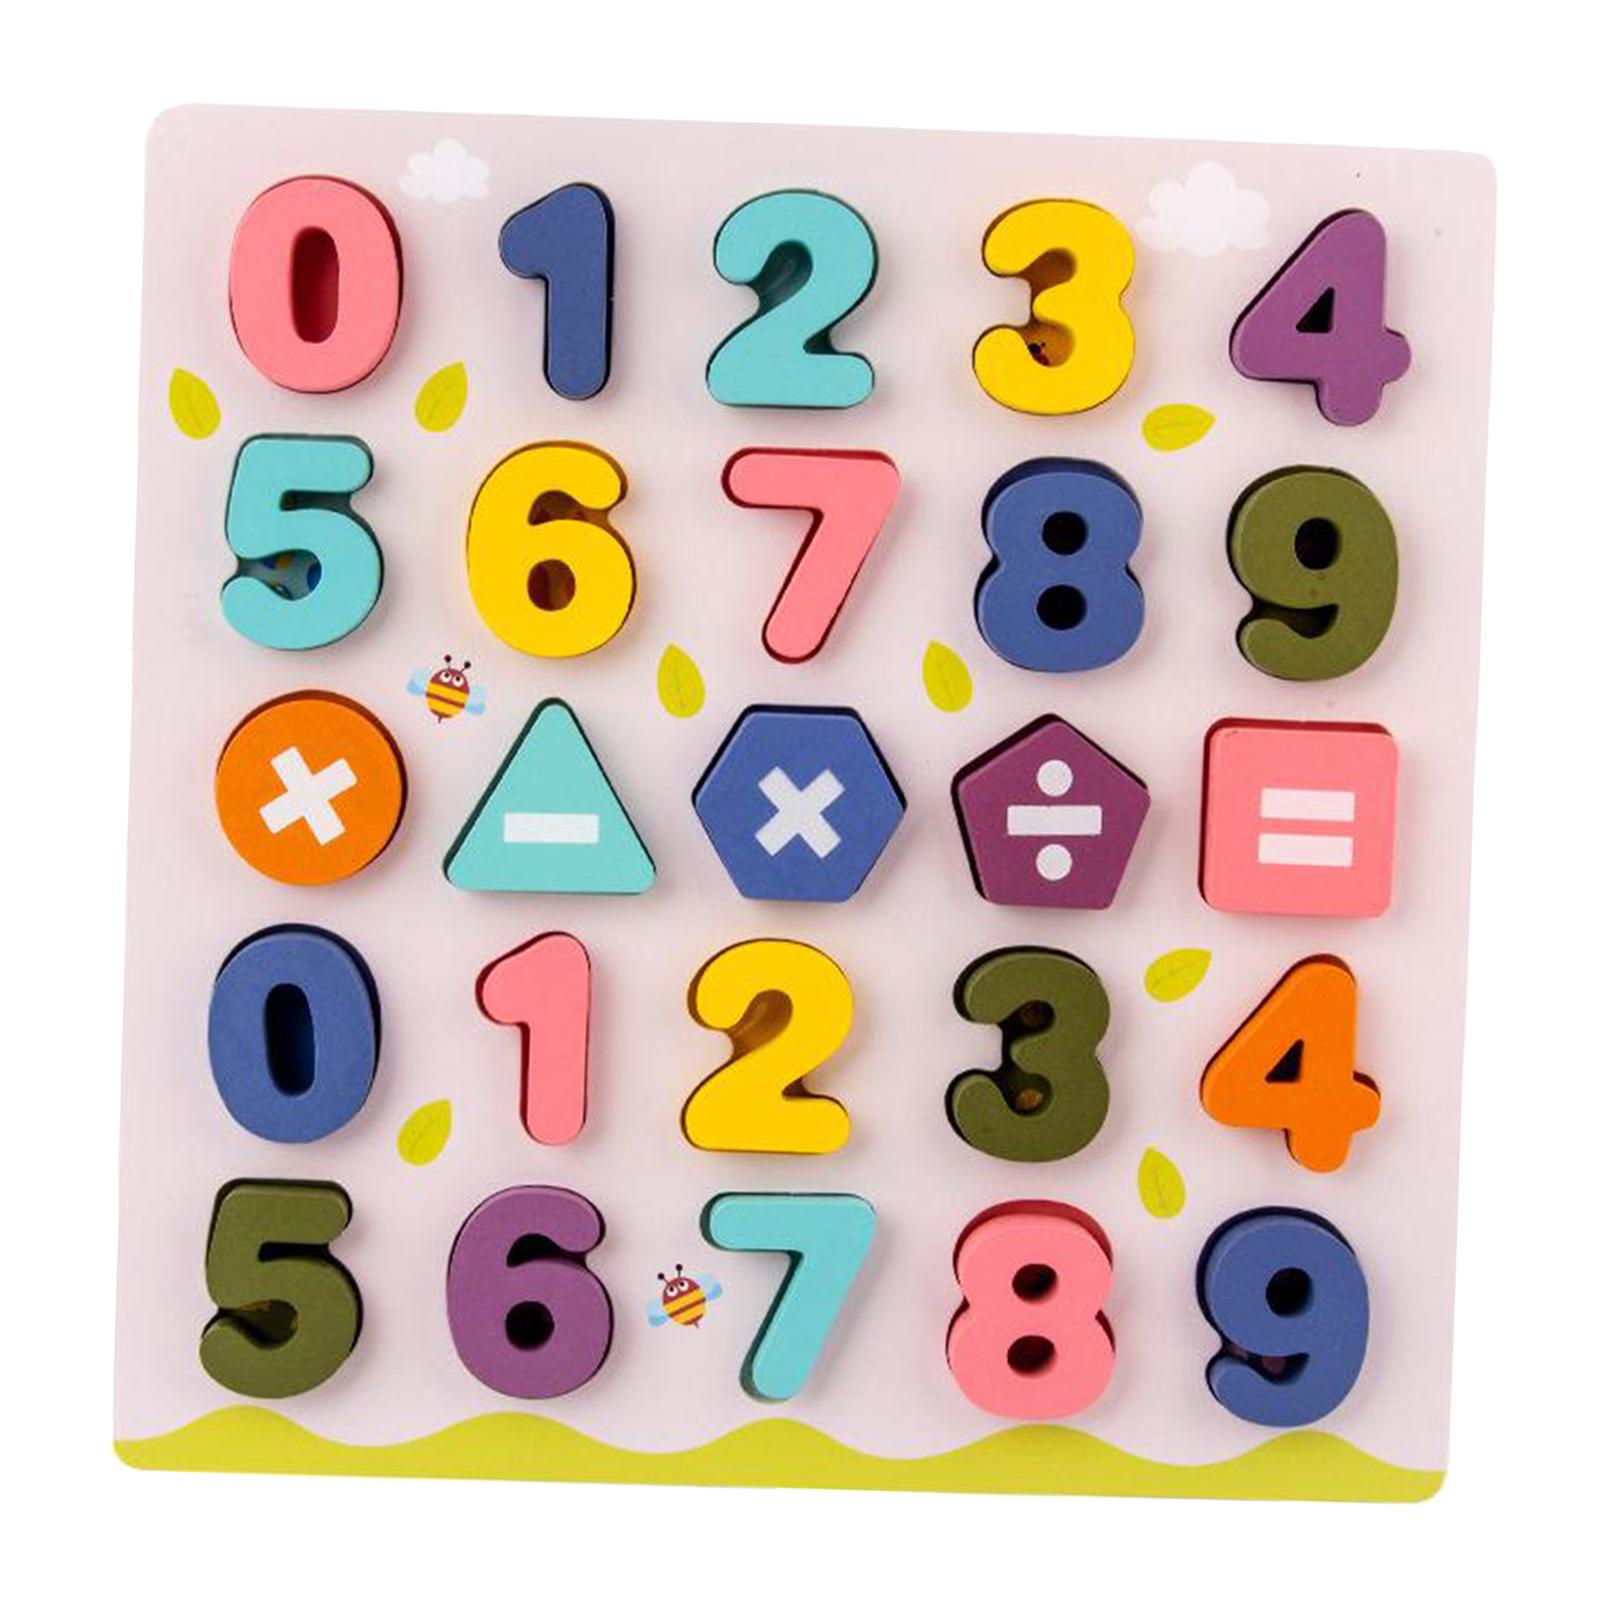 Toddler Jigsaw Kids Puzzle Letters Numbers Wooden Learning Toys